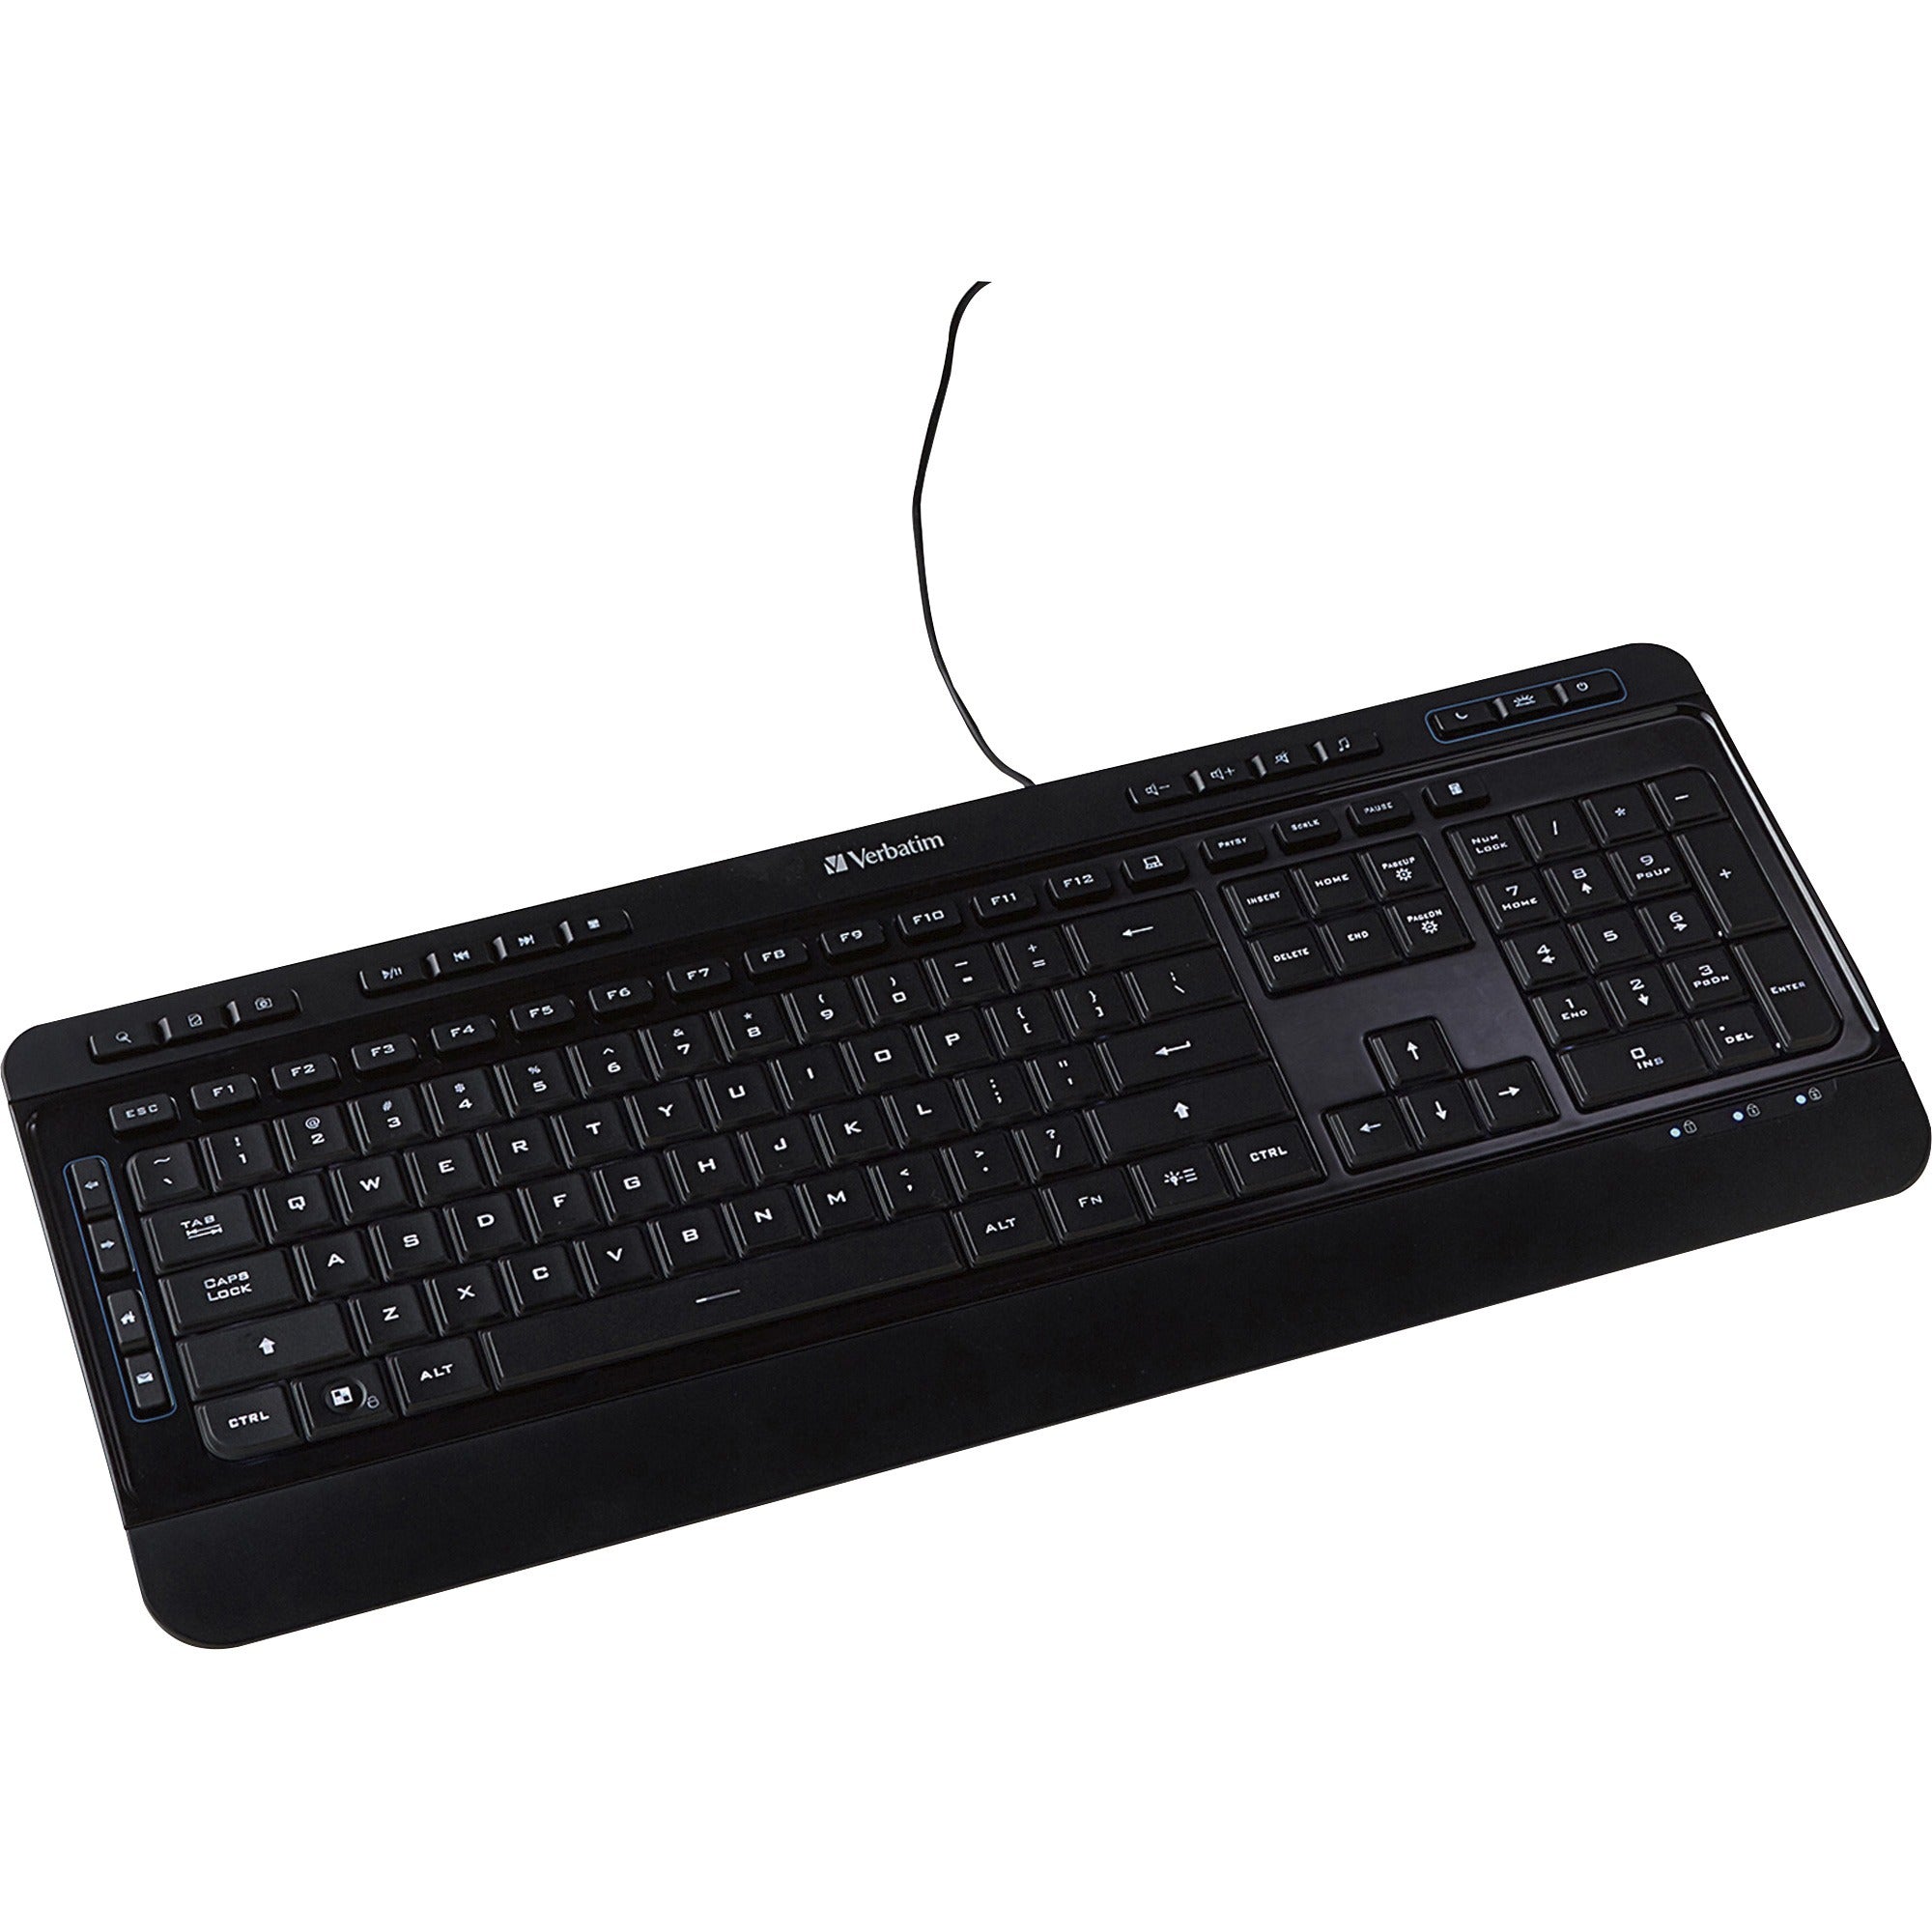 verbatim-illuminated-wired-keyboard-cable-connectivity-usb-type-a-interface-media-player-hot-keys-windows-mac-os-linux-black_ver99789 - 1